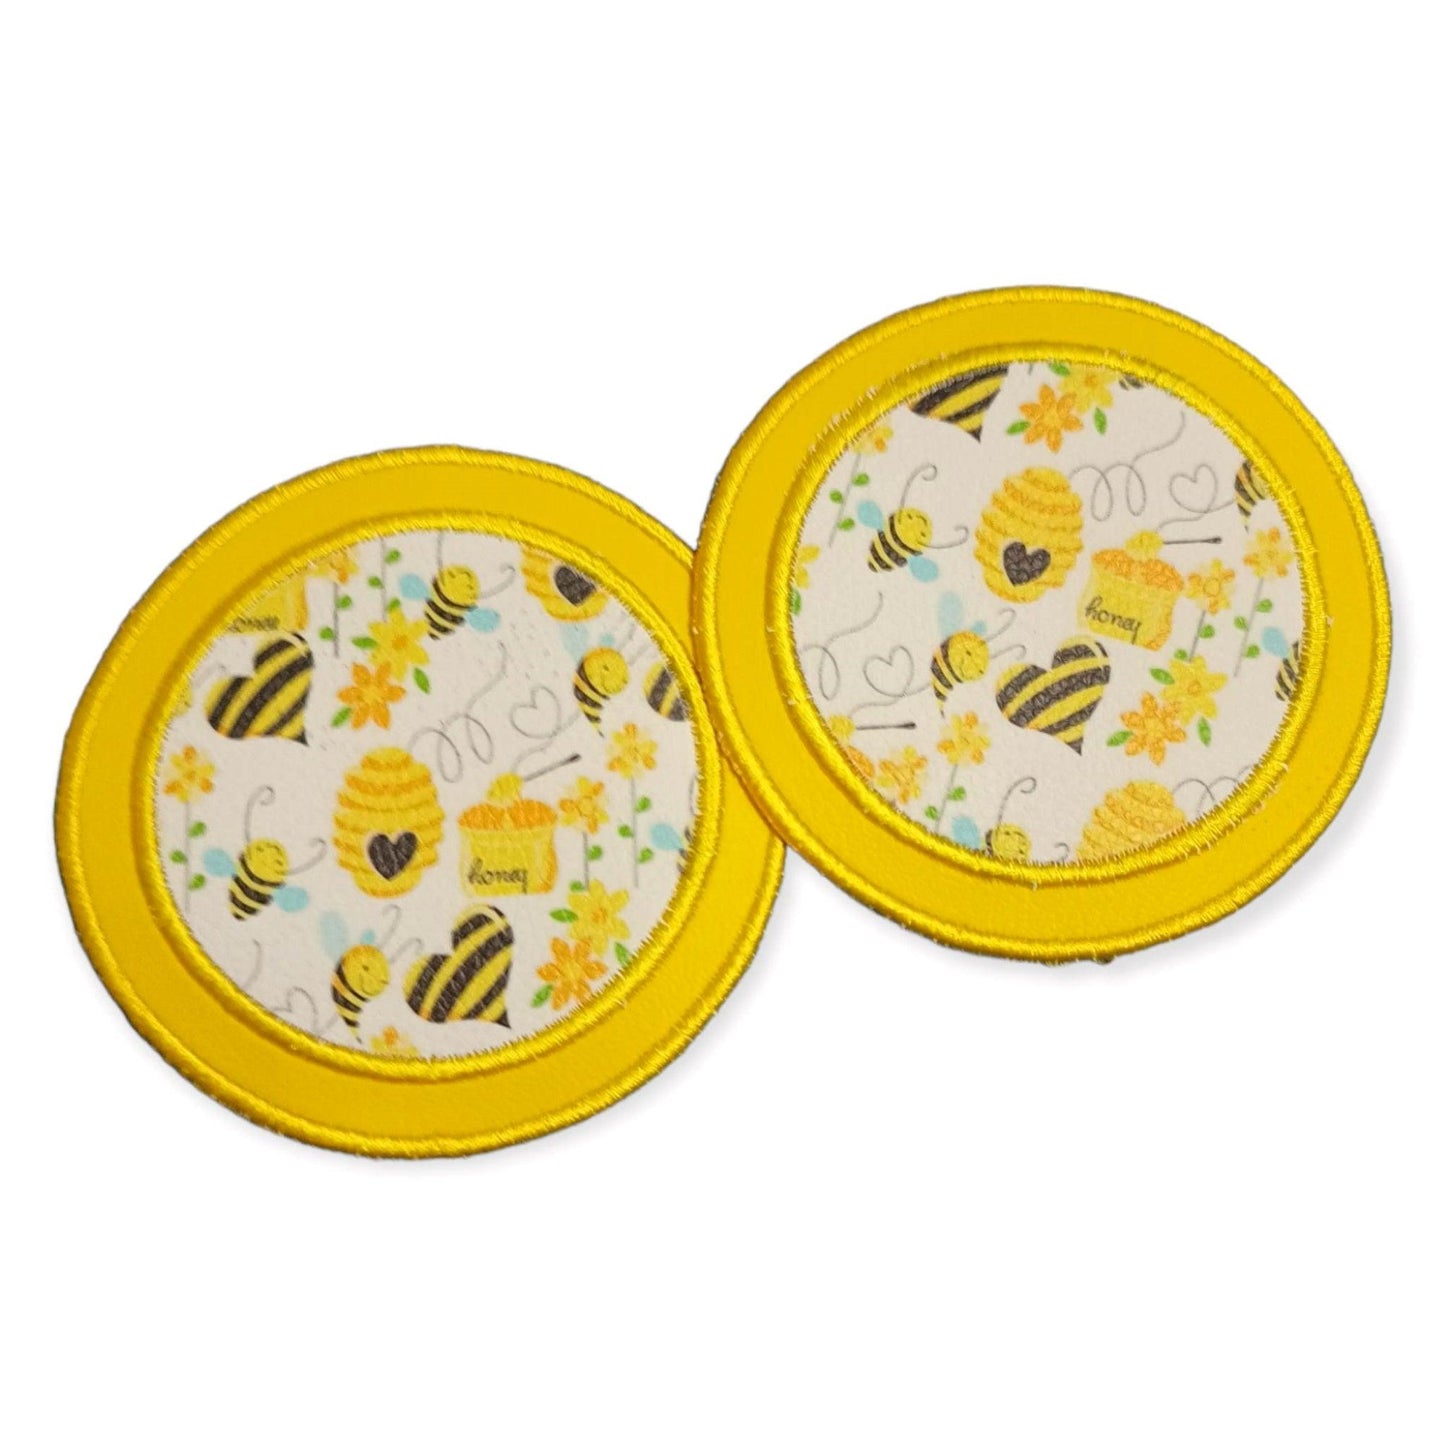 Bee themed vinyl coasters, made in Australia - Lil-aiges Creations - Quality Australian-made Gifts